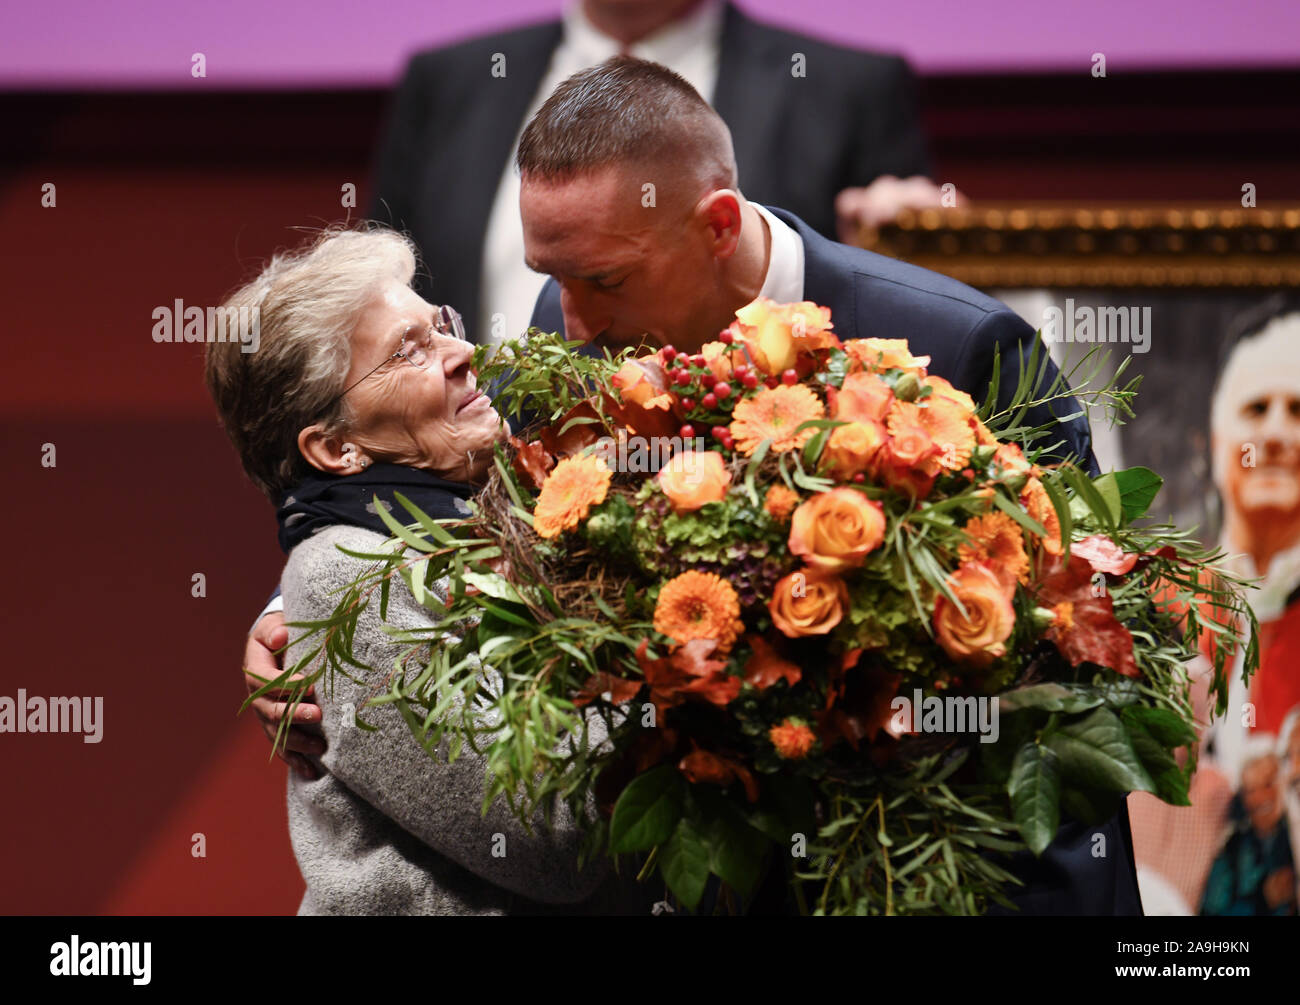 15 November 2019, Bavaria, Munich: Soccer: Bundesliga, Annual General Meeting FC Bayern Munich in the Olympiahalle. Susanne Hoeneß (l), wife of Uli Hoeneß, receives flowers from Franck Ribery (r), former FC Bayern player. Photo: Tobias Hase/dpa Stock Photo